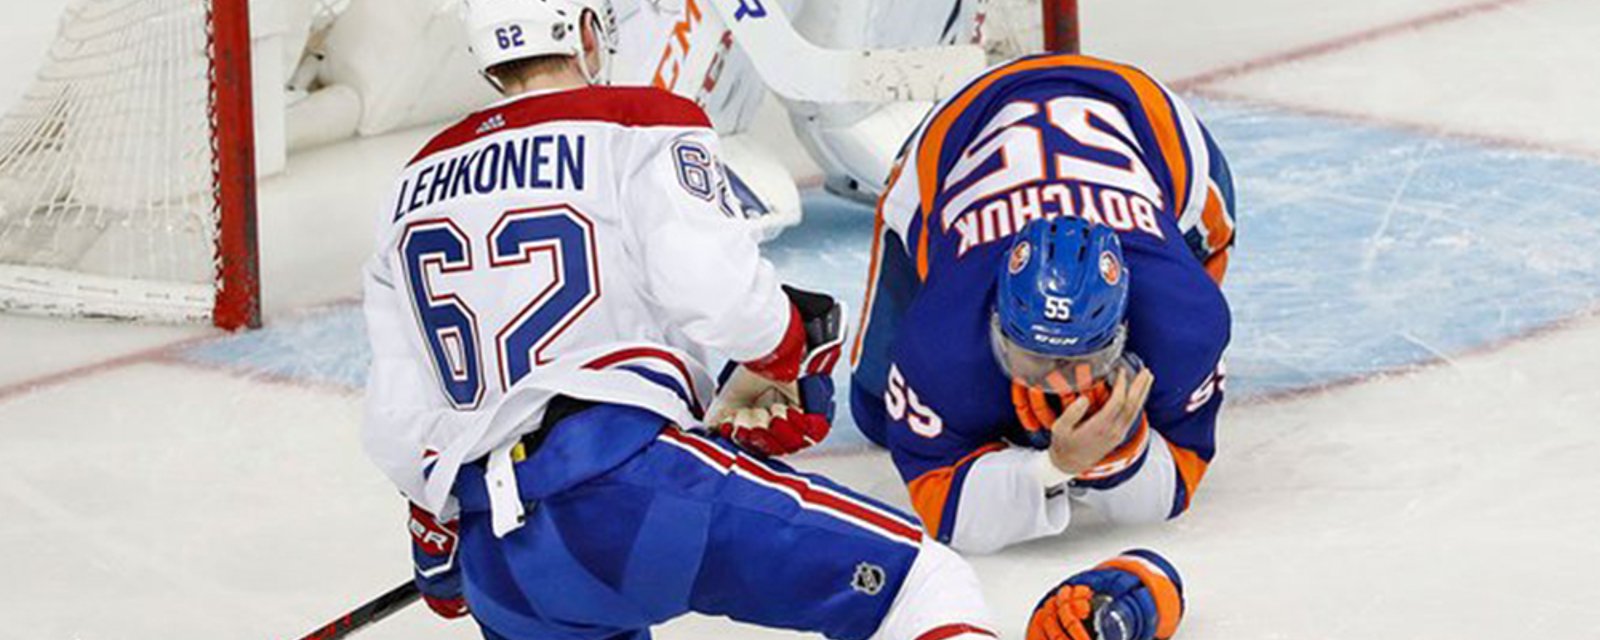 An update to the horrific injury suffered by Johnny Boychuk in last night's game